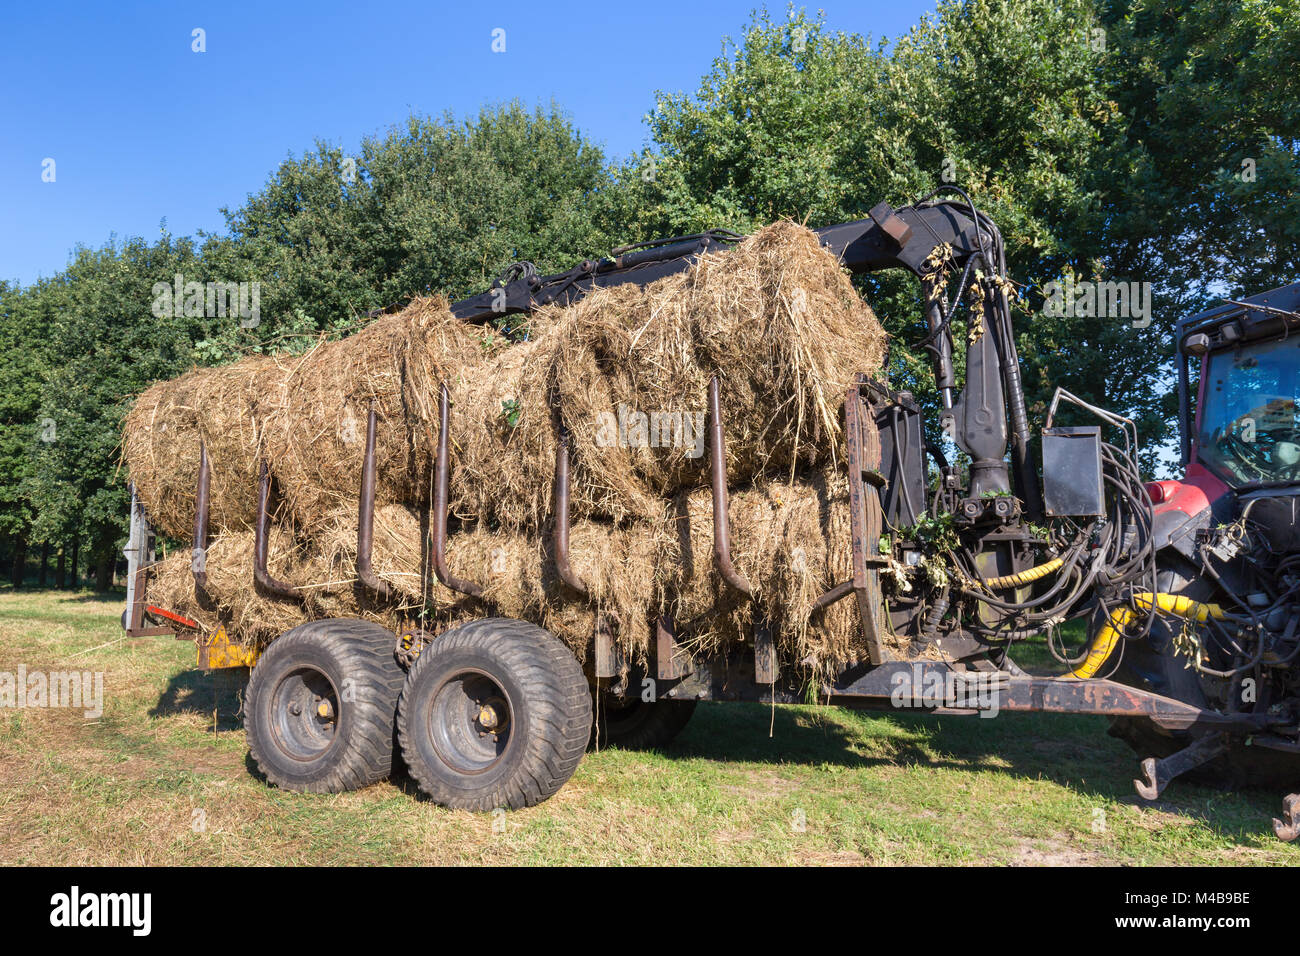 Agricultural vehicle filled with round hay bales Stock Photo